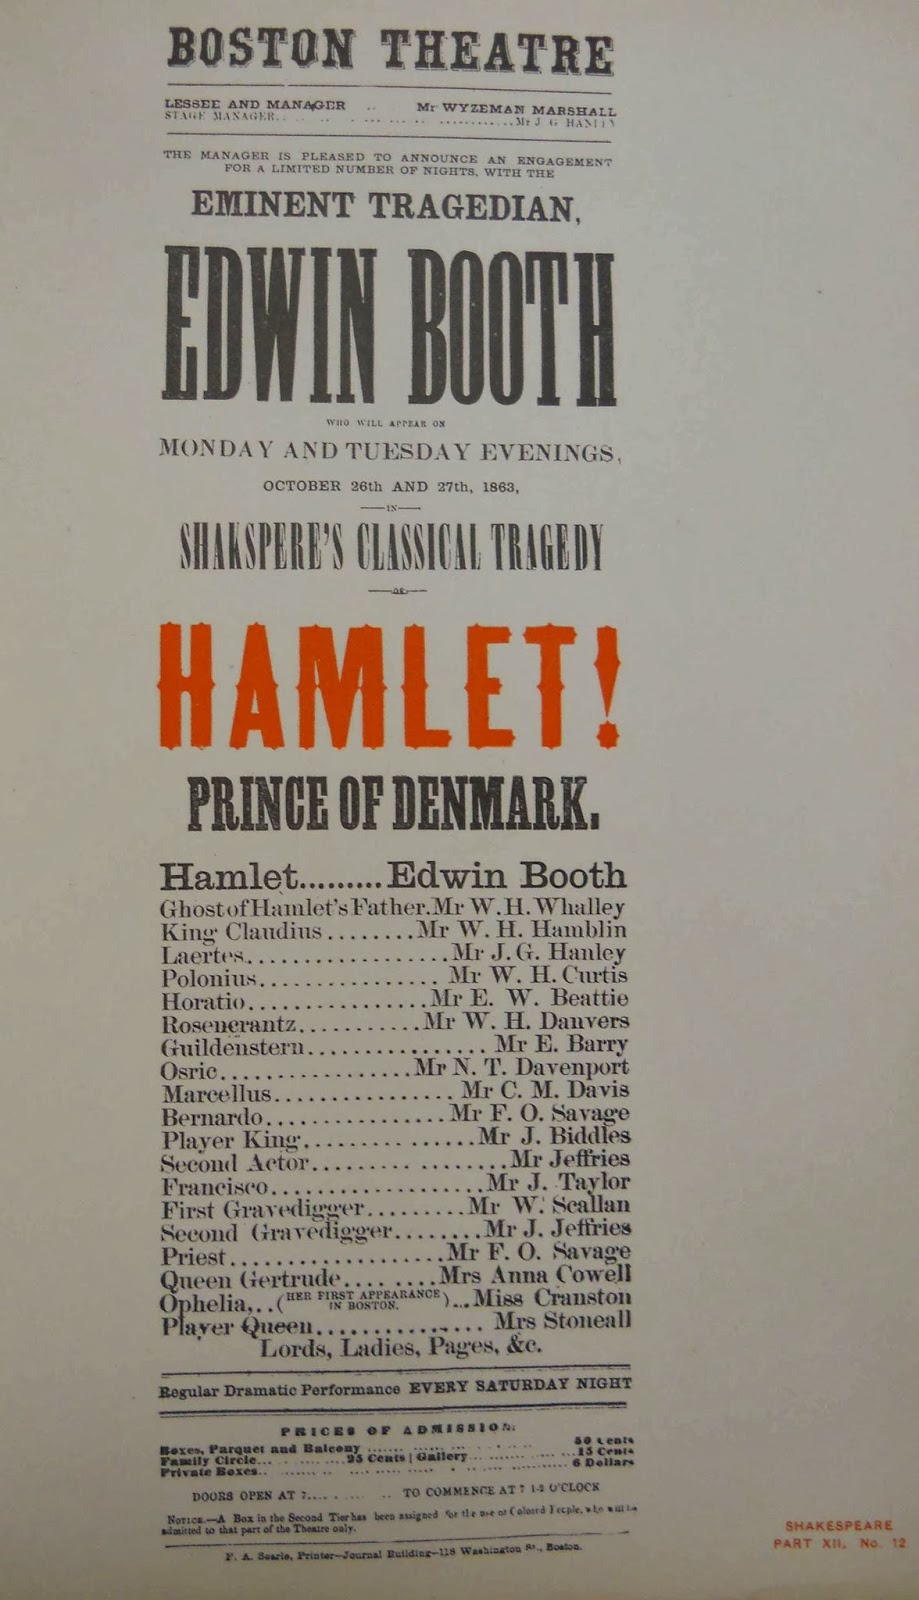 Advertisement for Boston Theater production of Hamlet, from the Rare Print Collection